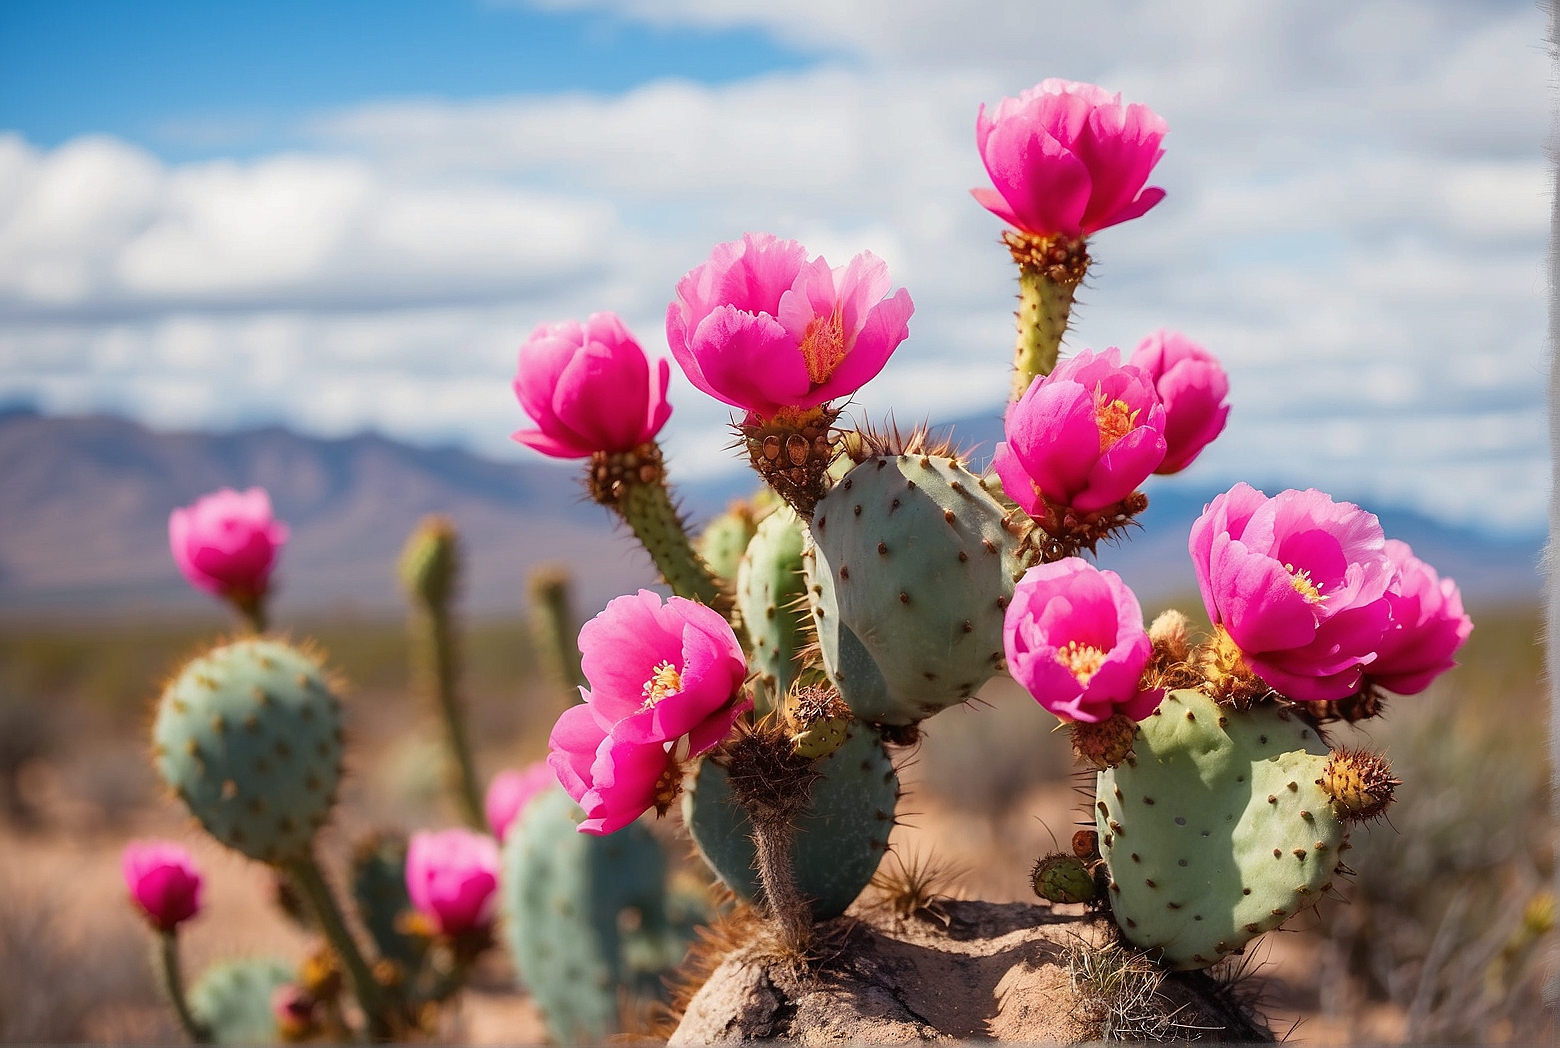 A Complete Guide on Pruning Prickly Pear Cactus